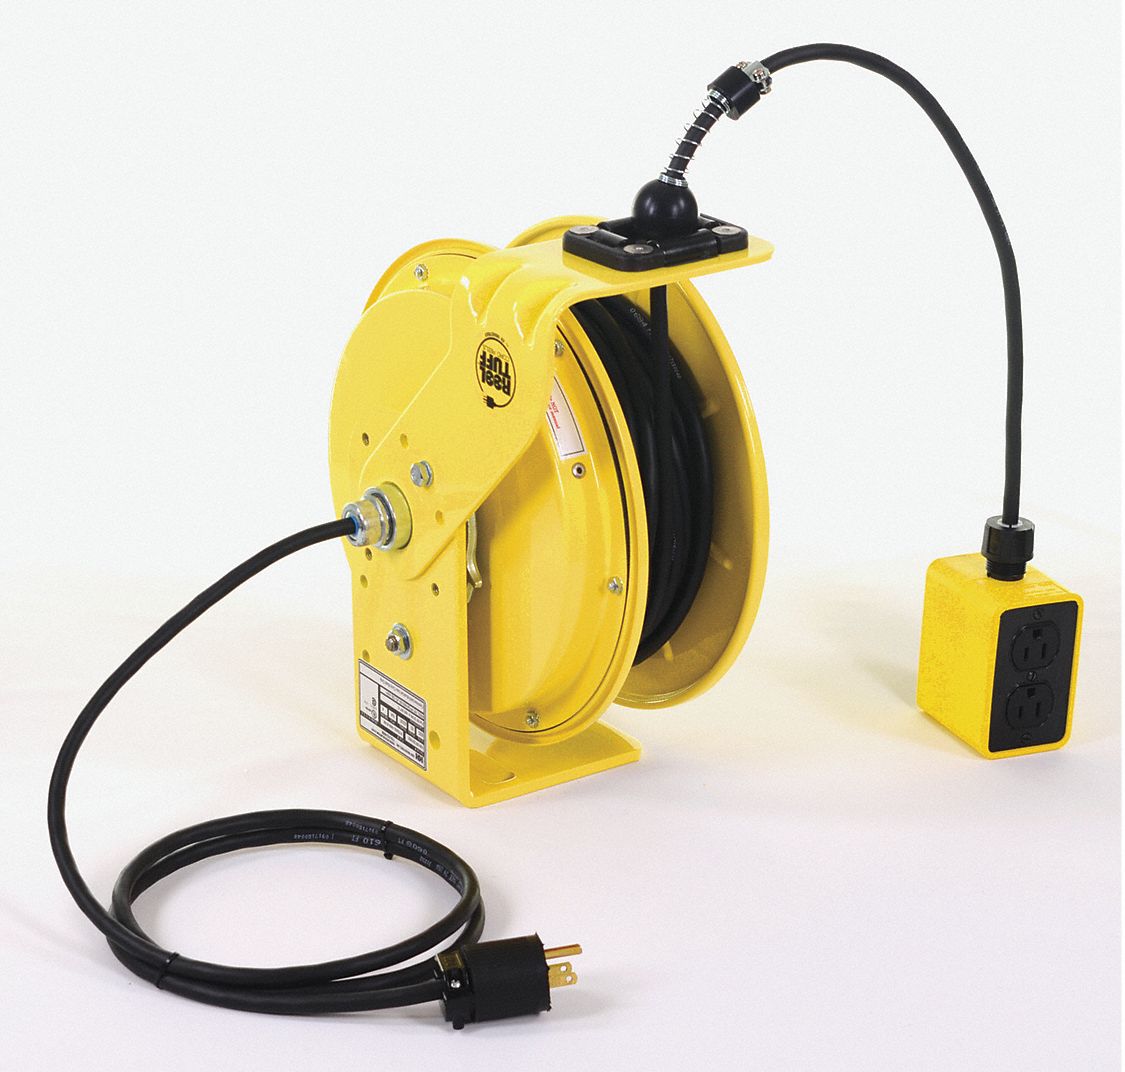 KH INDUSTRIES RETRACTABLE CORD REEL, STEEL, 16 AWG, 4 OUTLETS, 10A, 125V  AC, 3 CONDUCTORS, 35 FT - Self-Retracting Cord Reels - KHIRTBA3LWD515J16H